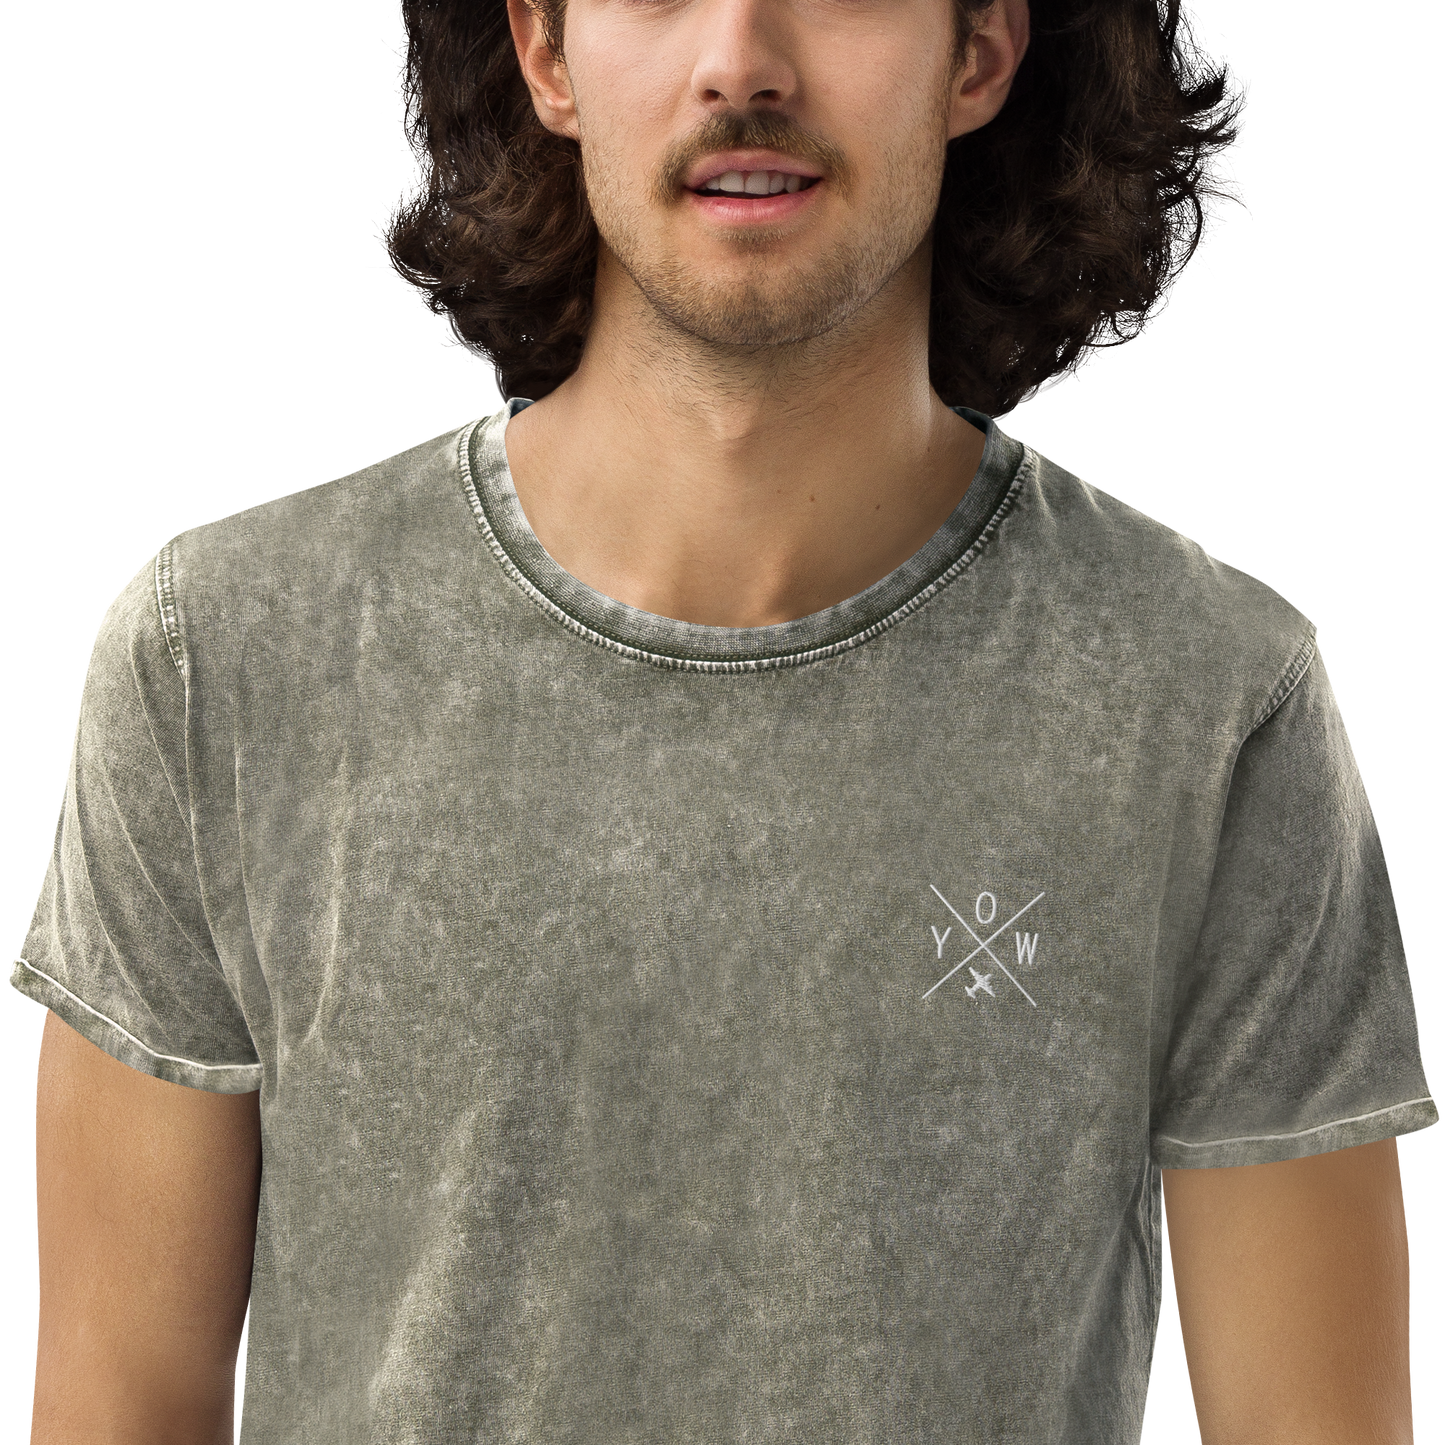 YHM Designs - YOW Ottawa Denim T-Shirt - Crossed-X Design with Airport Code and Vintage Propliner - White Embroidery - Image 11